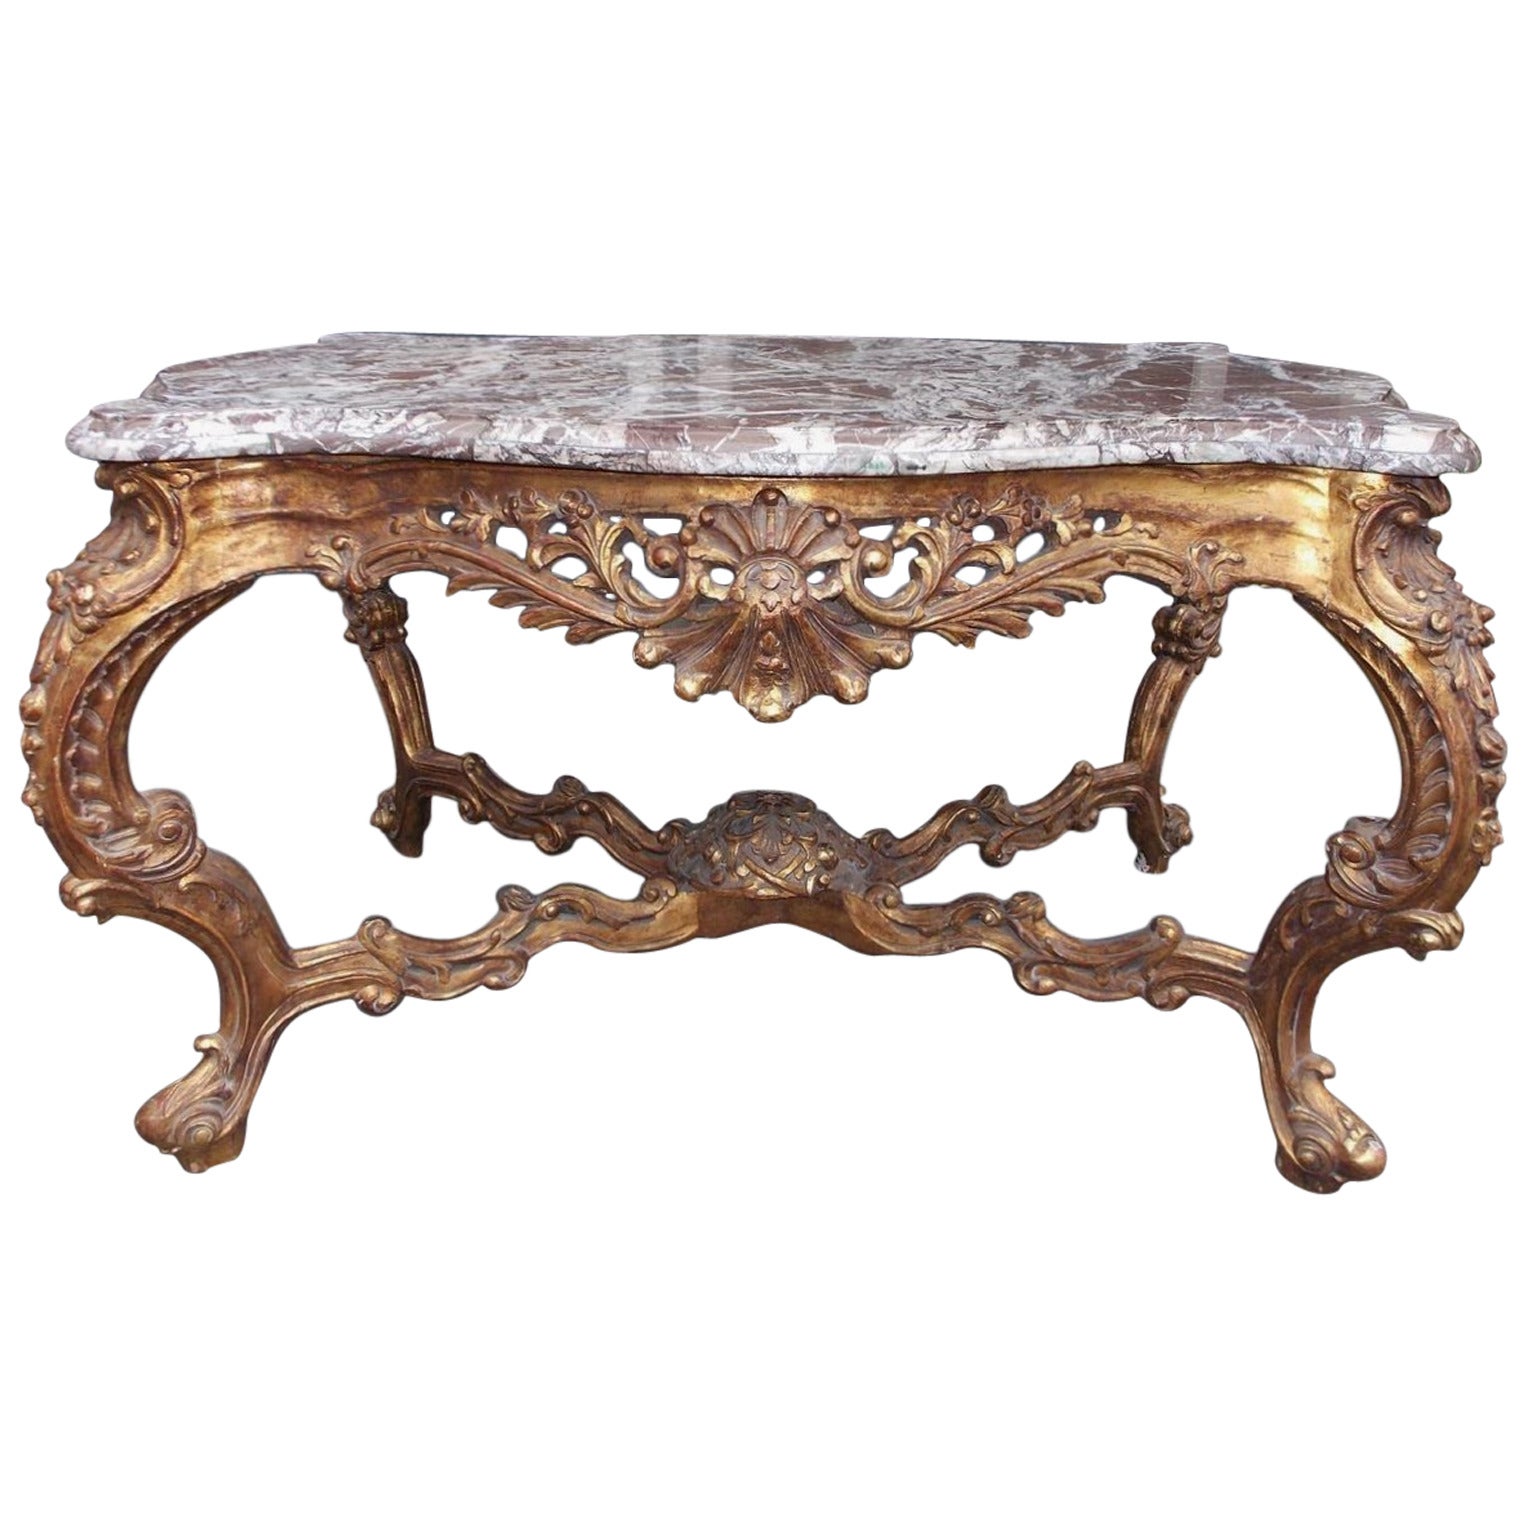 French Serpentine Marble-Top and Gilt Floral Center Table, Circa 1770 For Sale